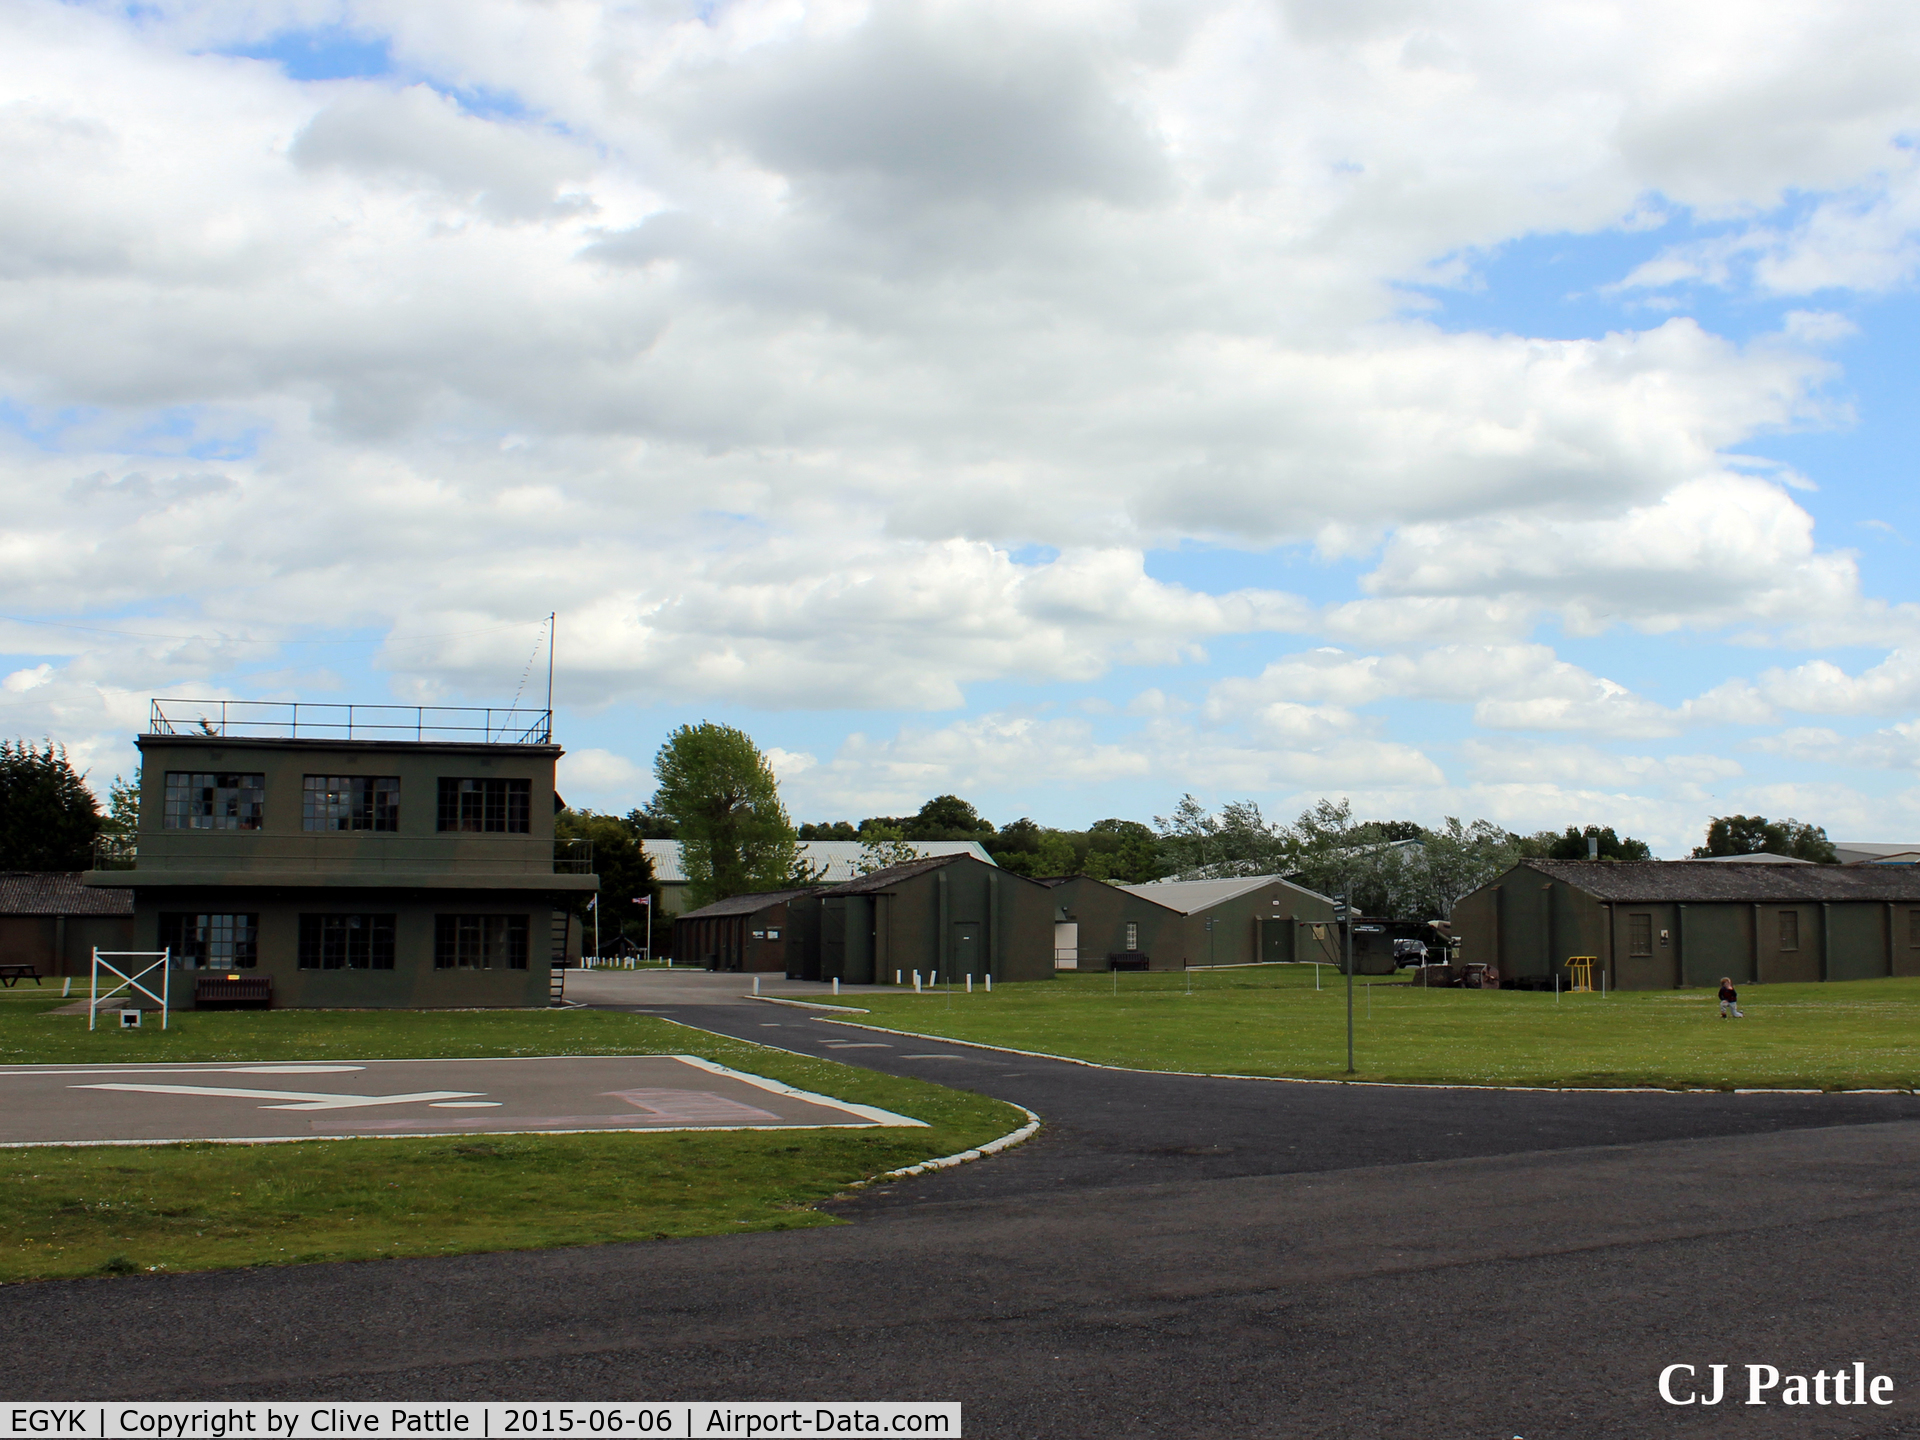 EGYK Airport - A view of the watchtower and nissen hut buildings at the Yorkshire Aviation Museum, Elvington. All of the buildings contain display items open to the public.